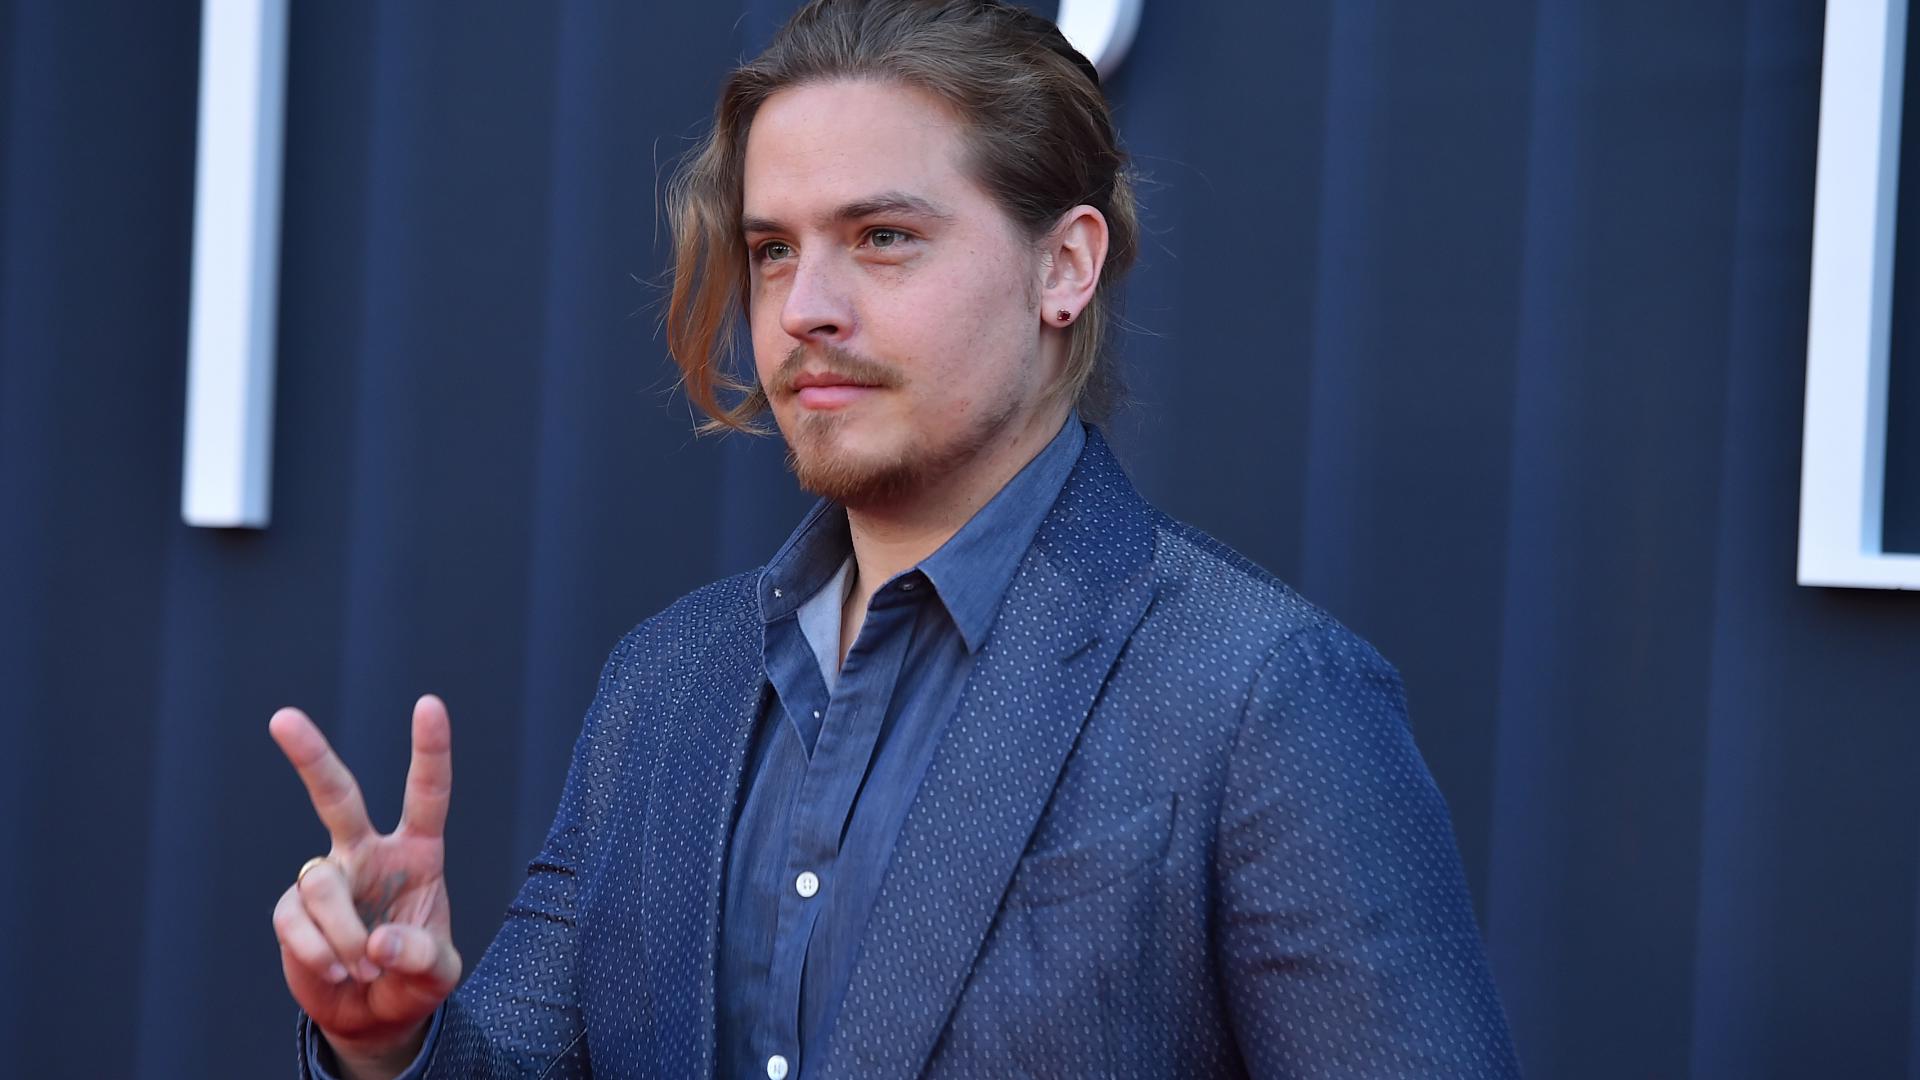 Dylan Sprouse, who rose to fame alongside his twin brother, Cole, in "The Suite Life of Zack & Cody," filmed most of his new film, "The Duel," in Indiana.